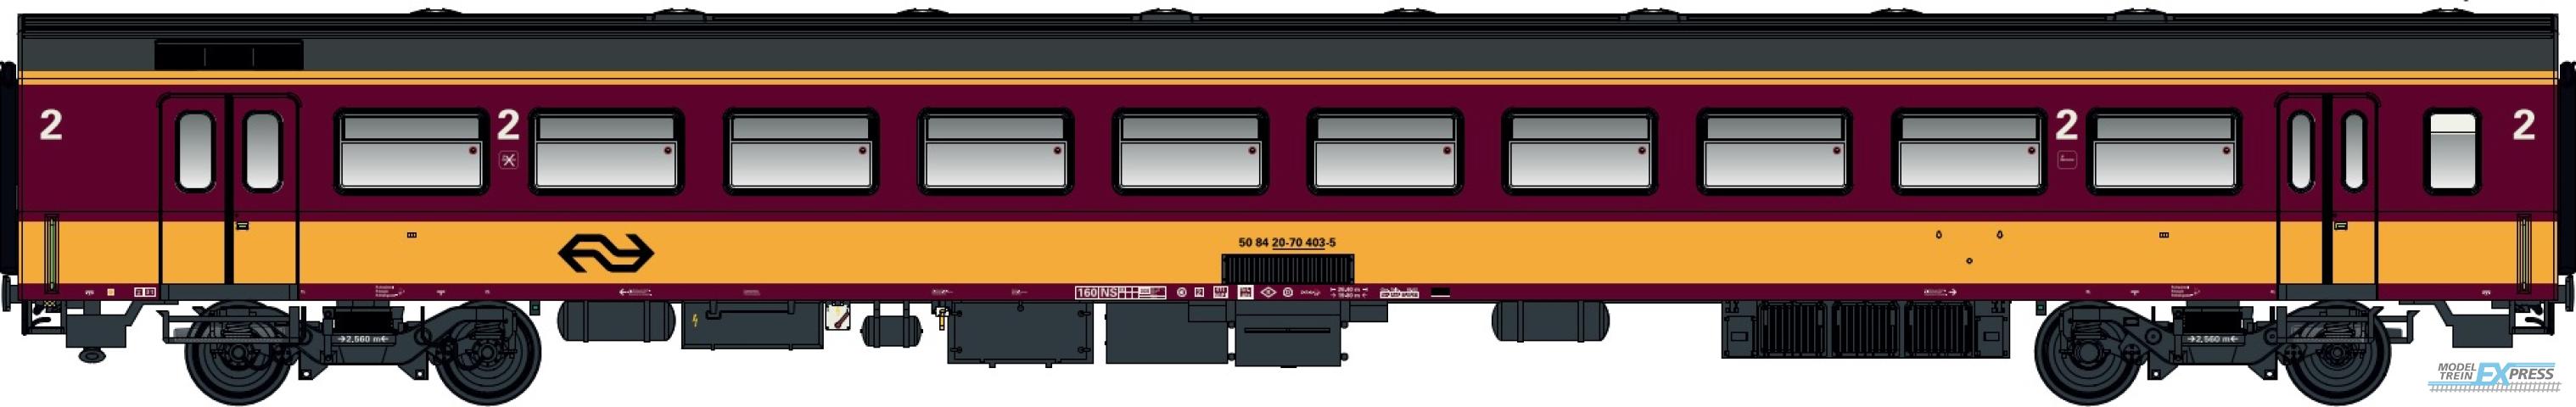 LS Models 44264 ICR, Benelux, rood, gele band, zonder airco  /  Ep. IV-VA  /  NS  /  HO  /  DC  /  1 P.